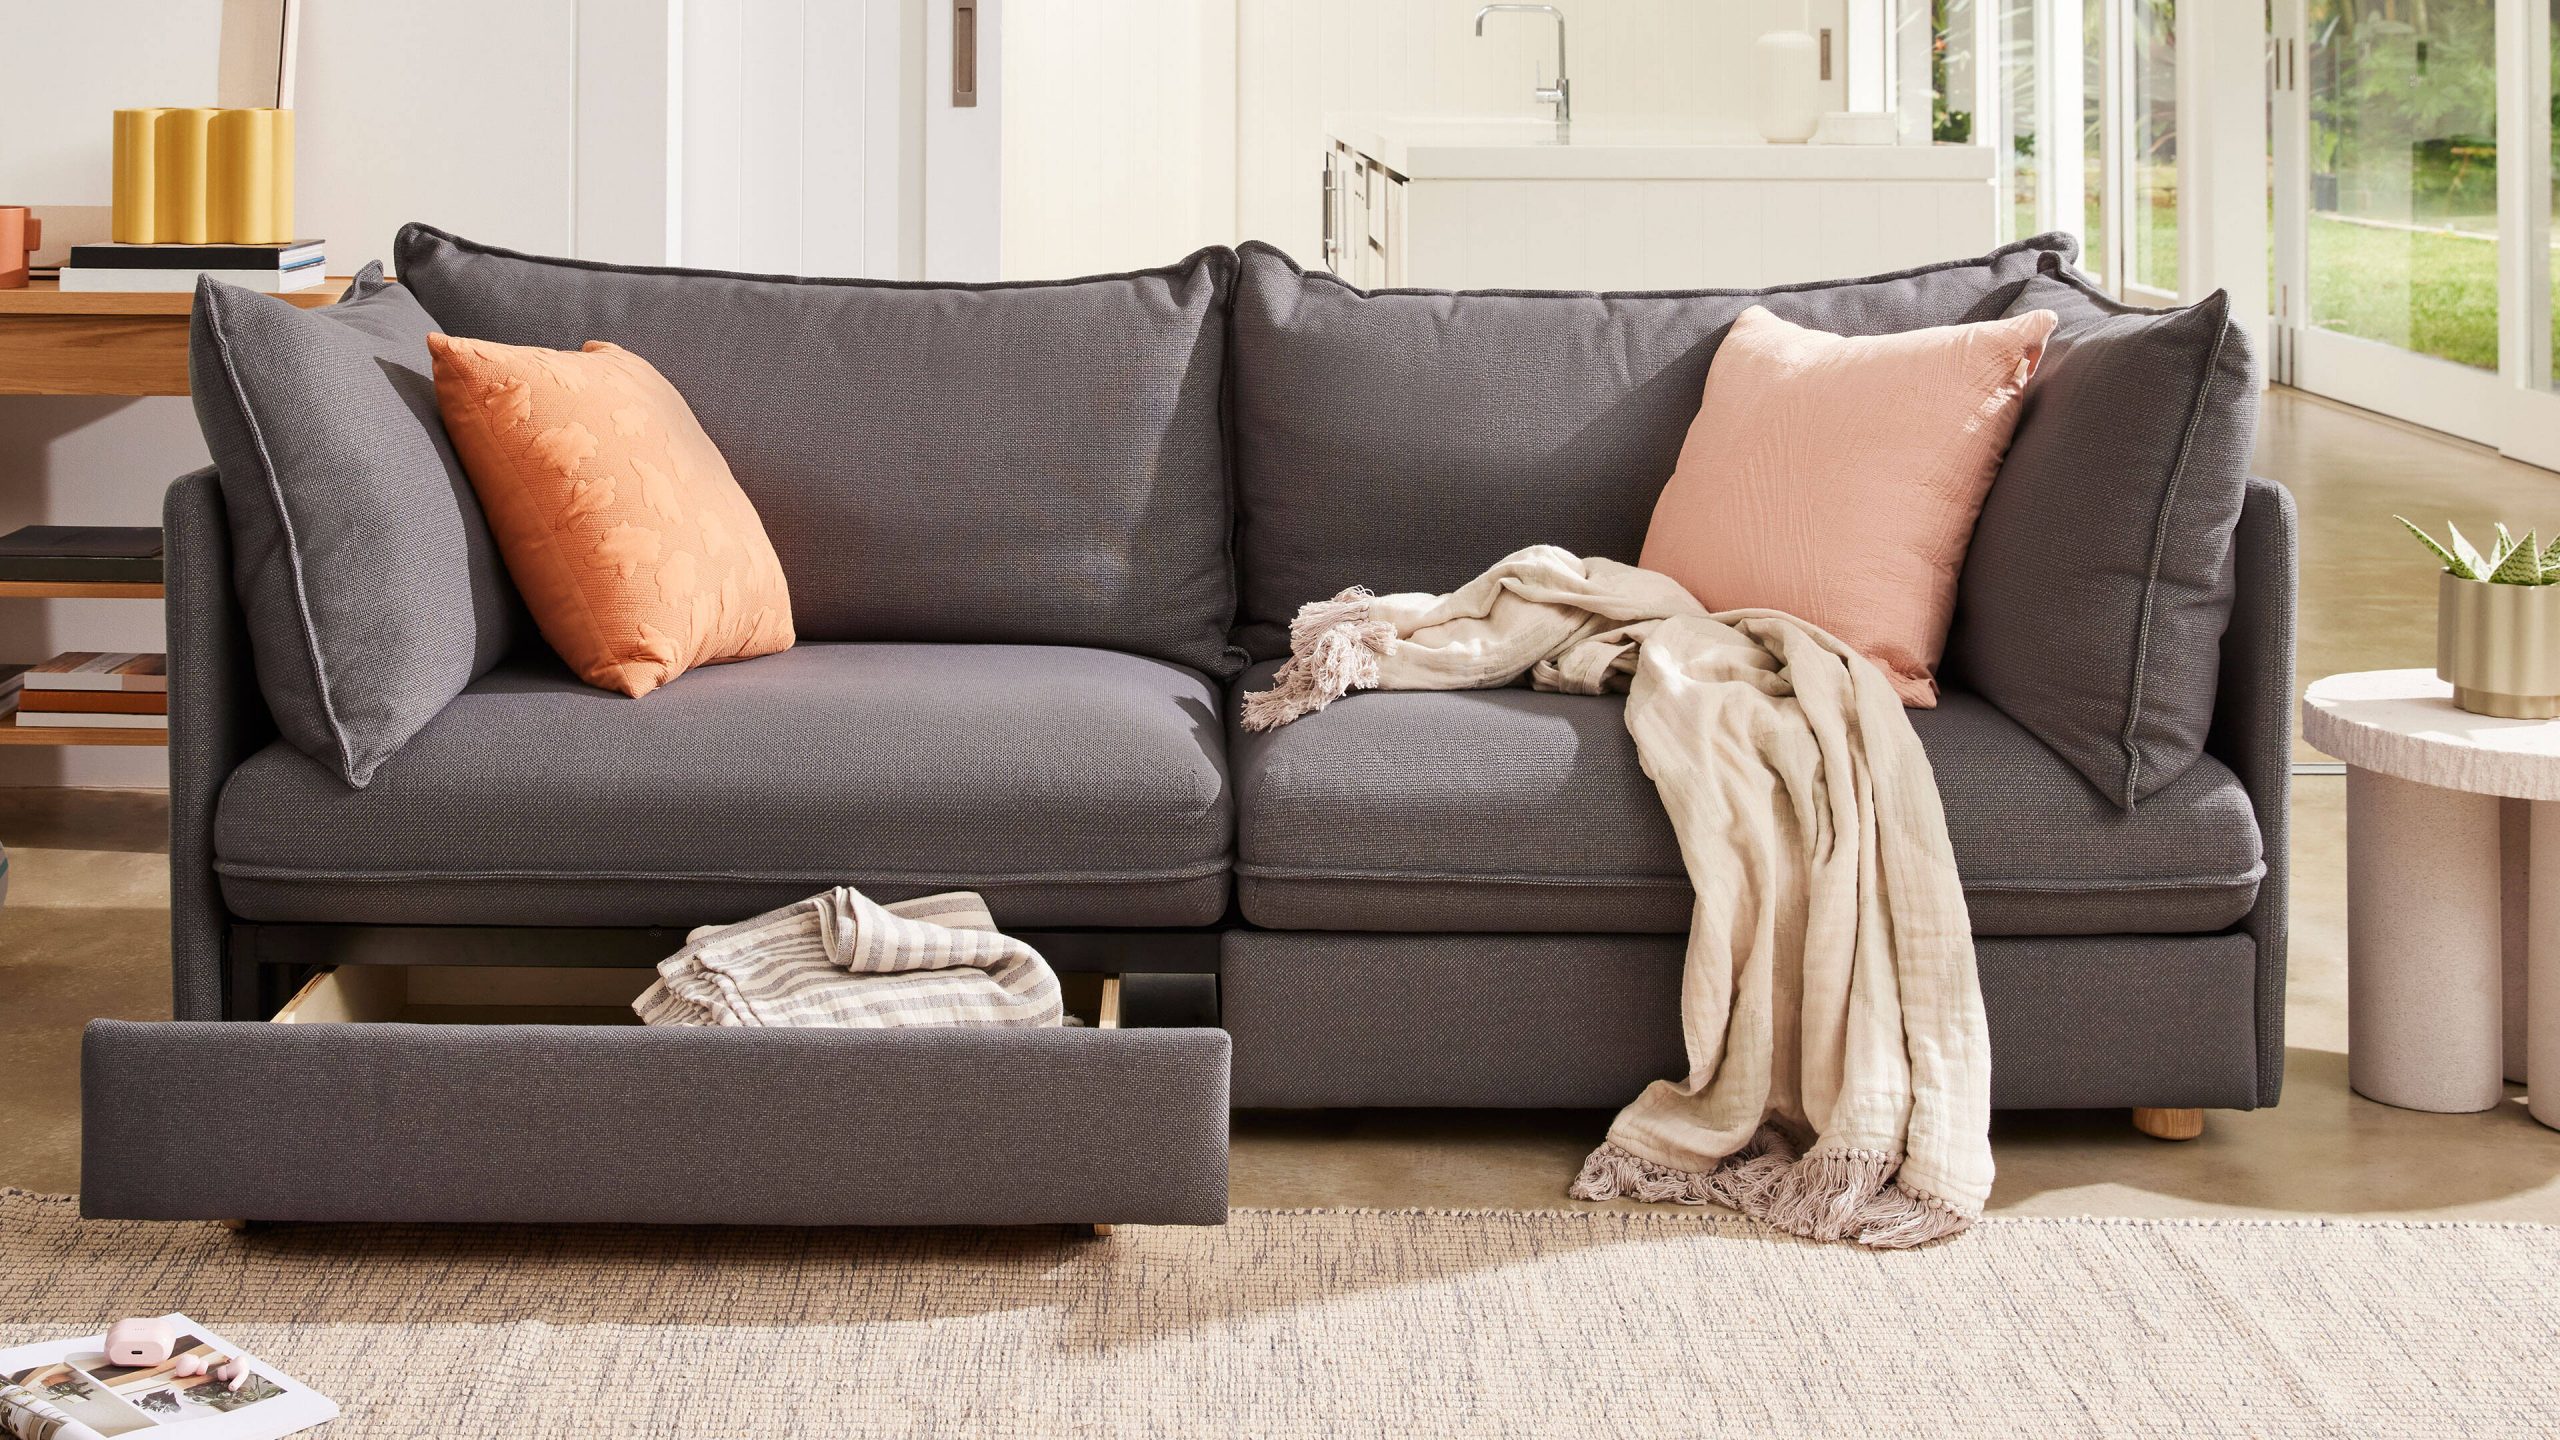 A grey three-seater, dark grey upholstered sofa with storage drawers.